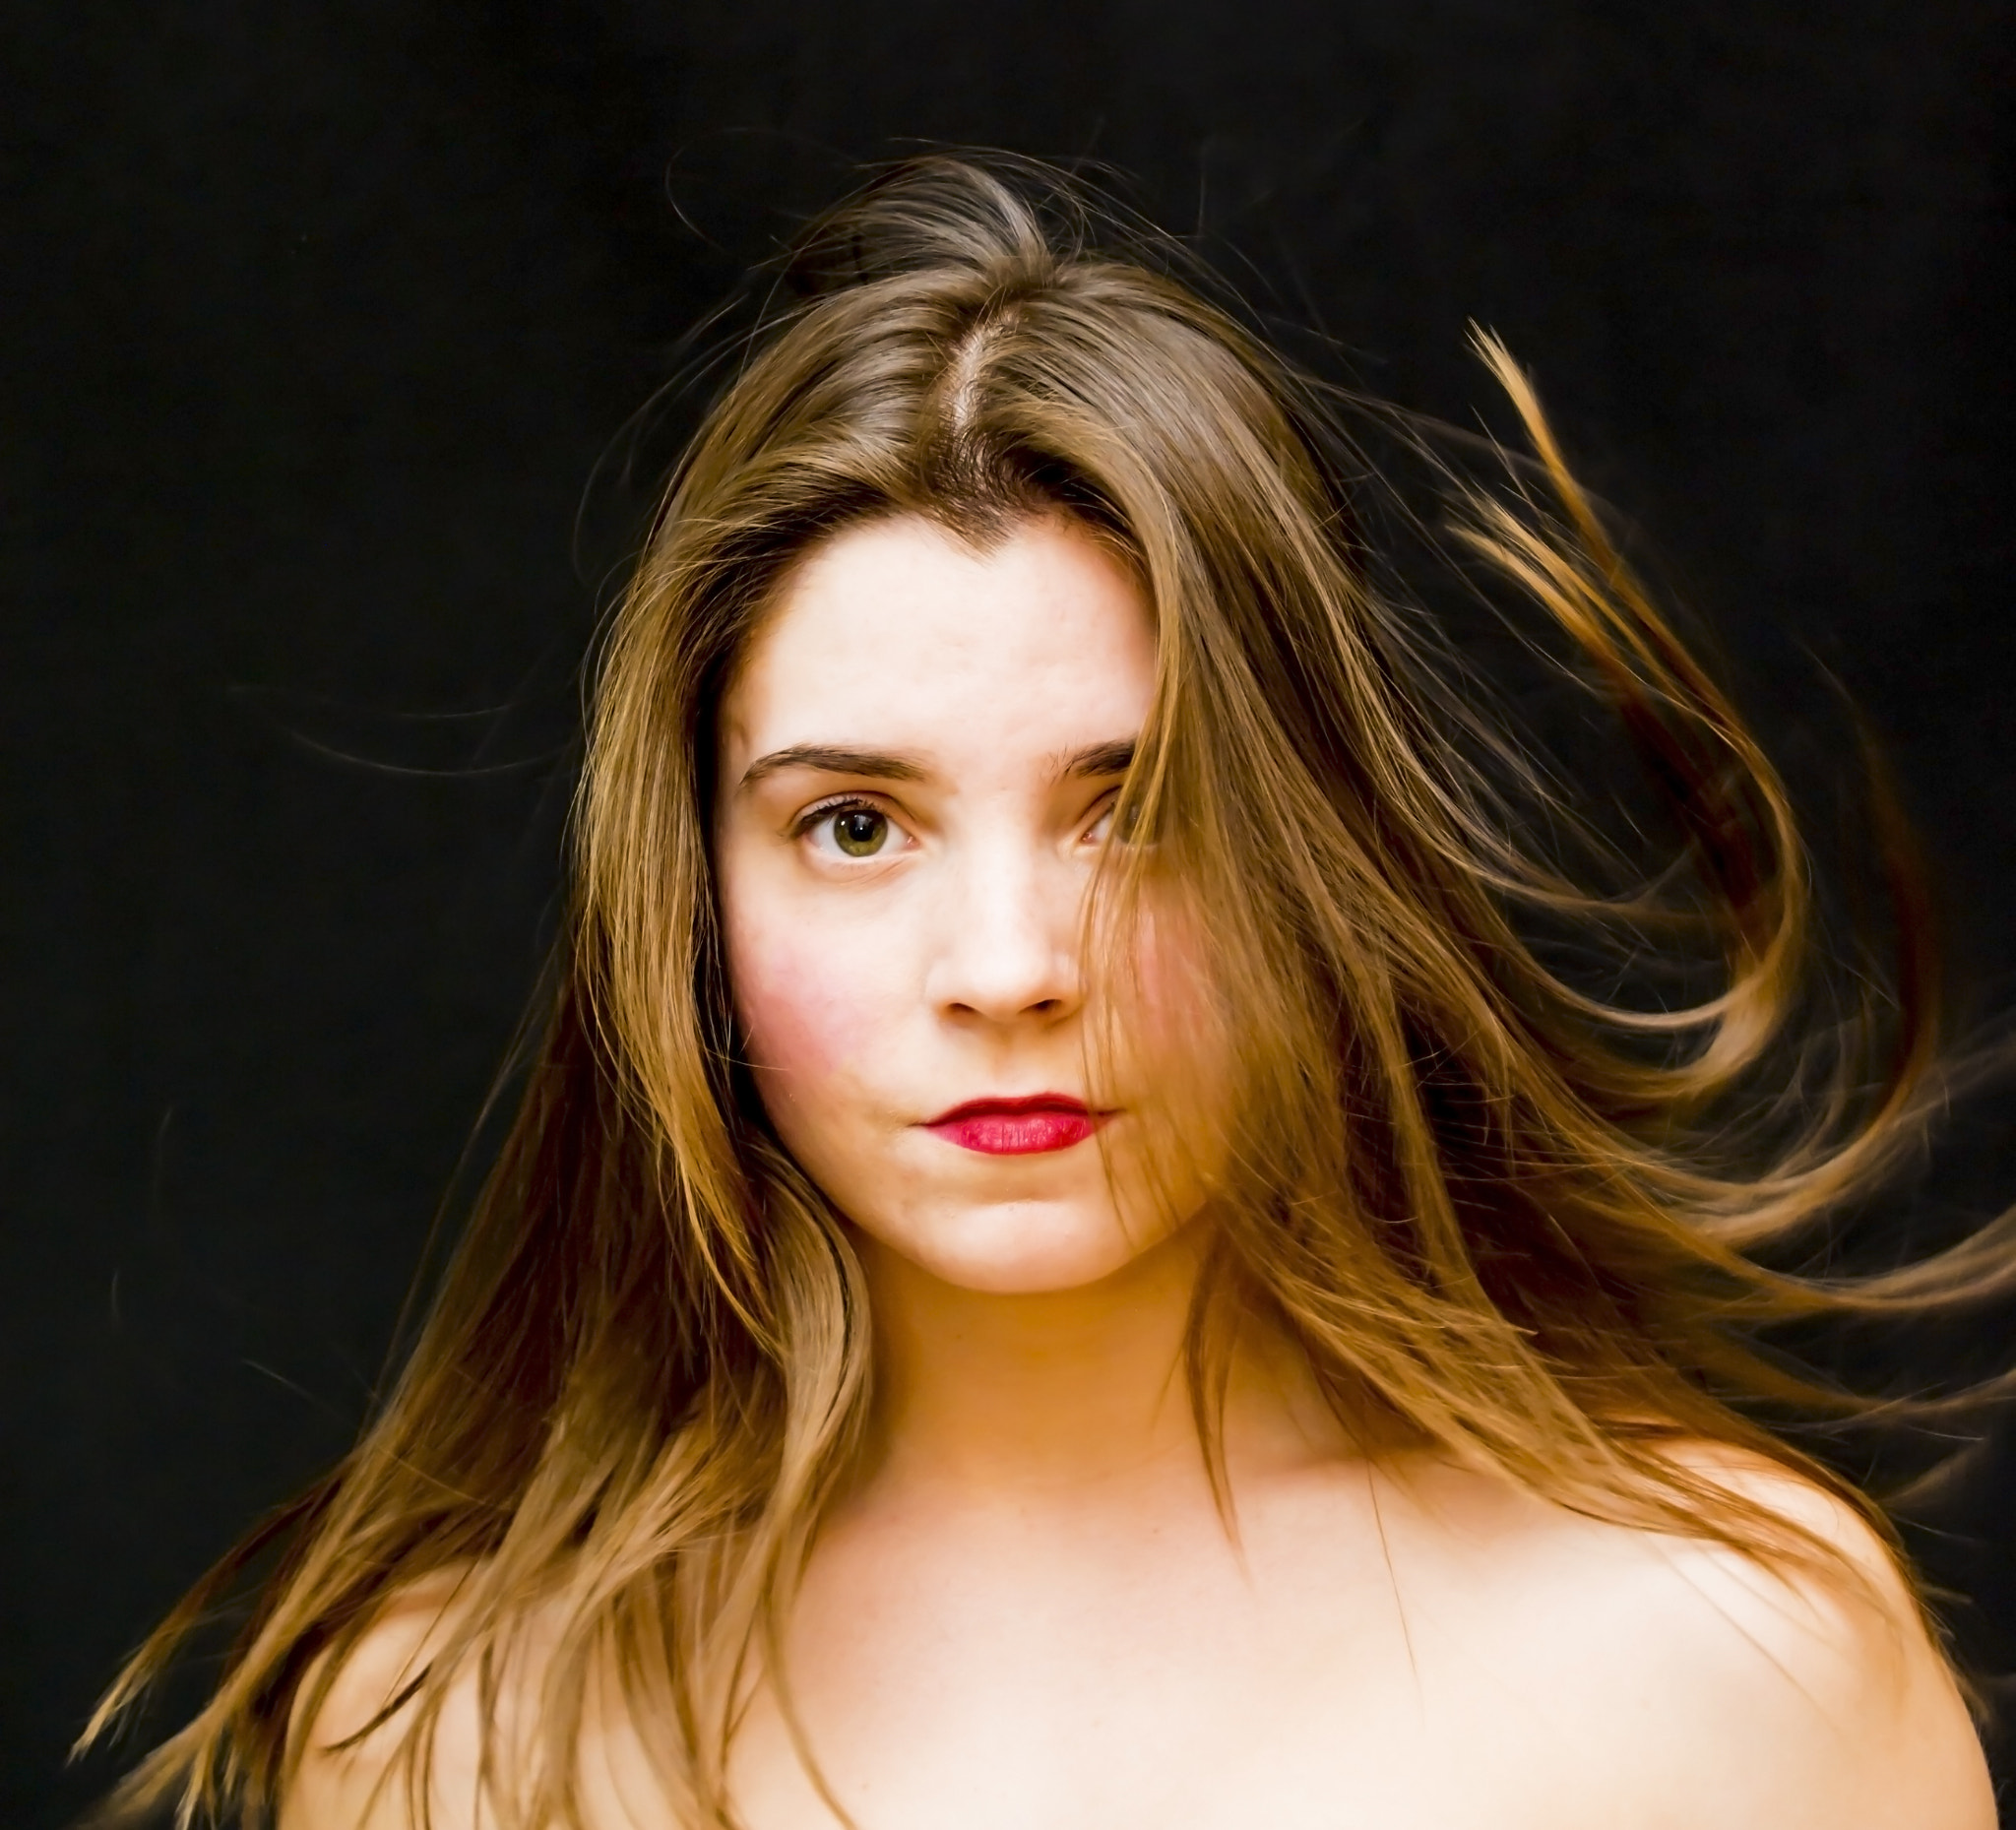 Nikon D7100 sample photo. Portrait of beautiful young woman shaking her hair photography